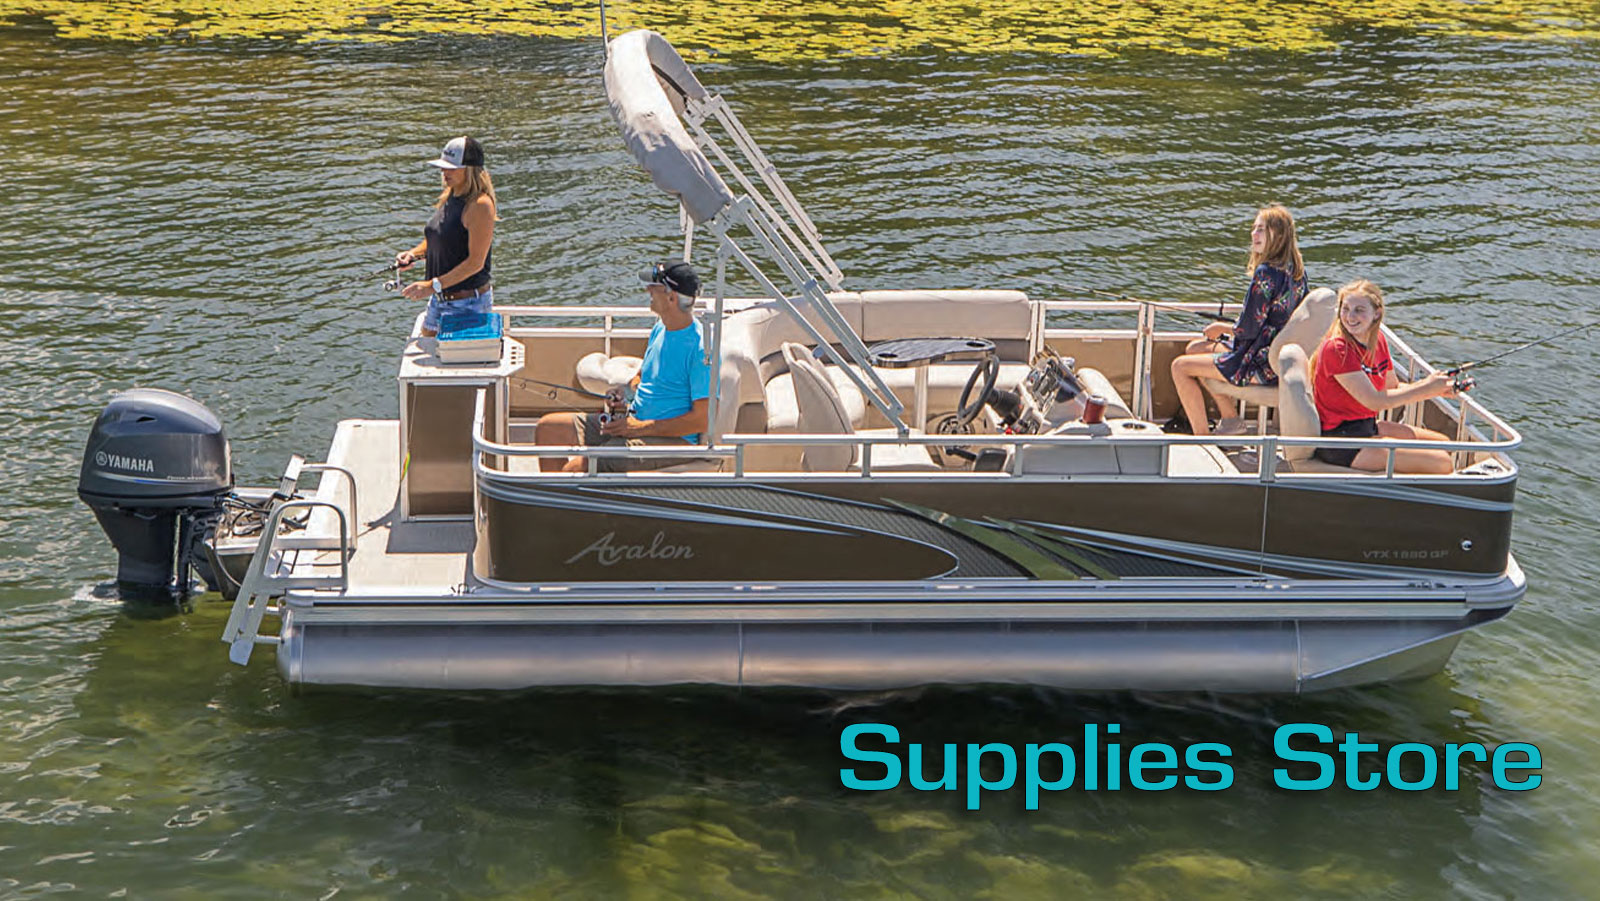 Luhrs Landing Supplies store for boating trips